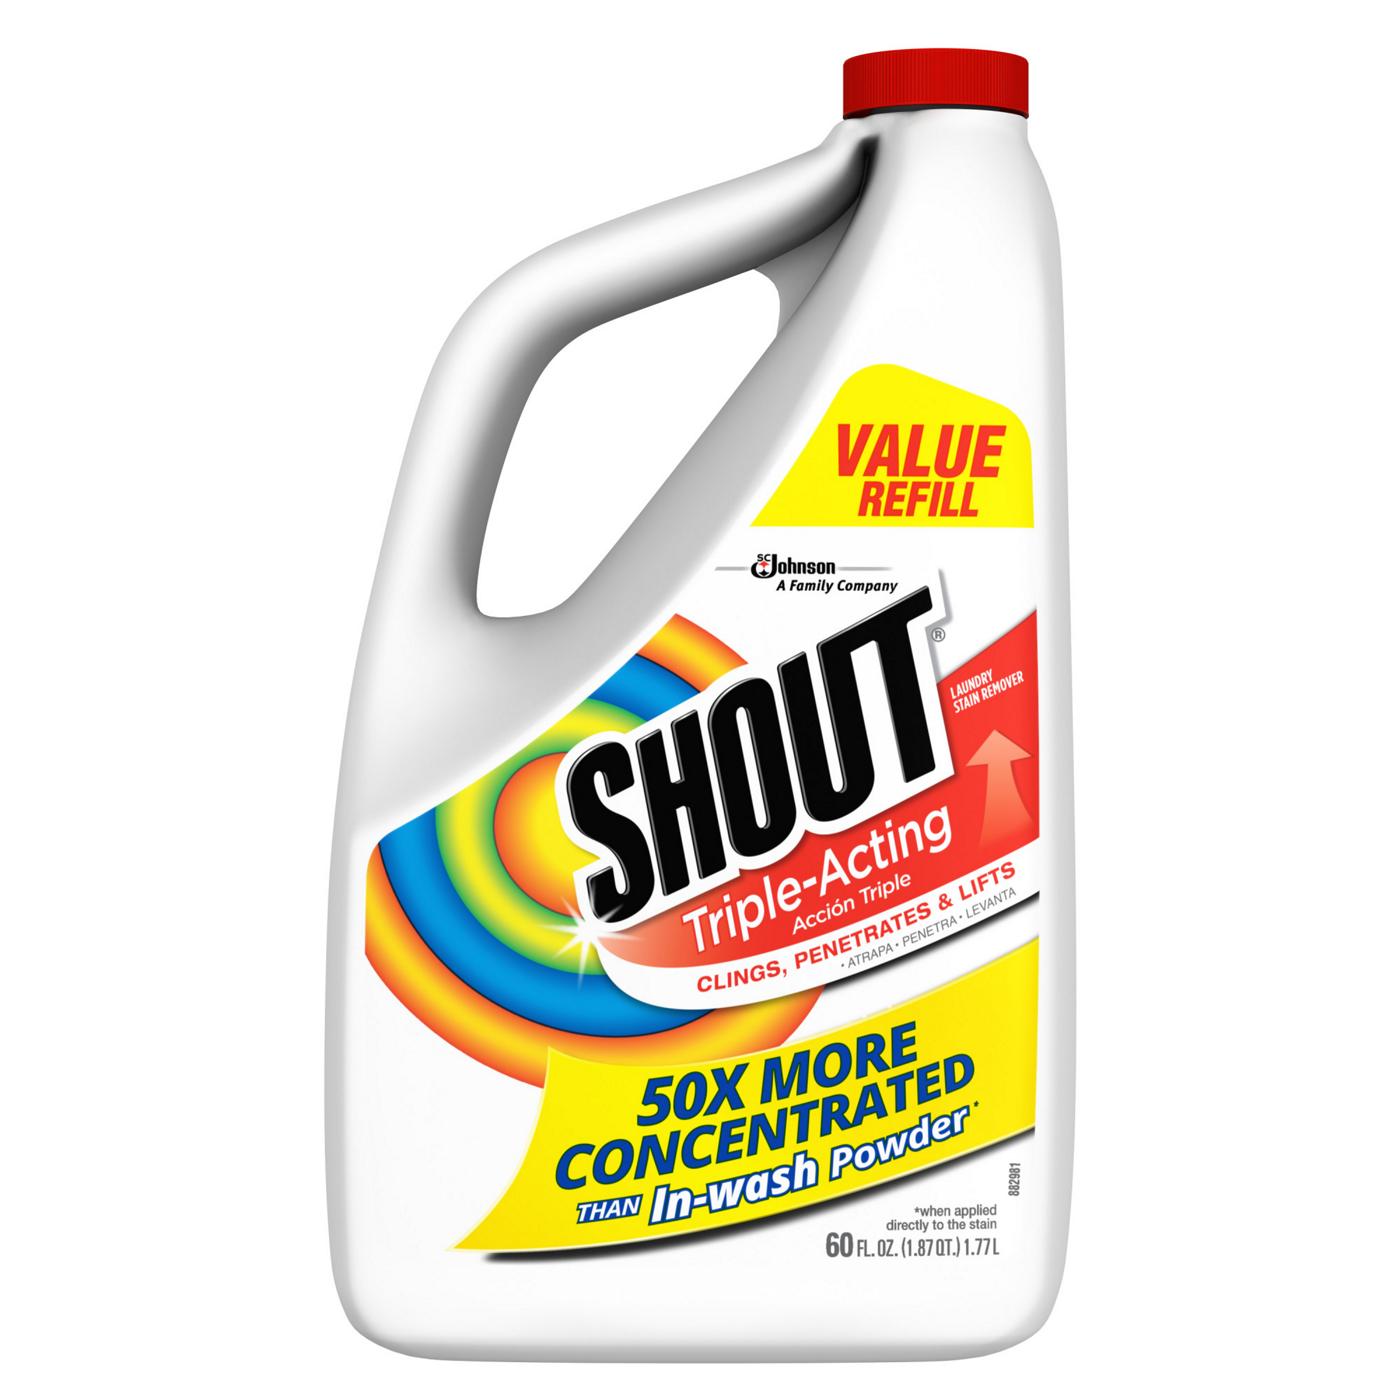 Shout Triple-Acting Laundry Stain Remover Value Size; image 1 of 8